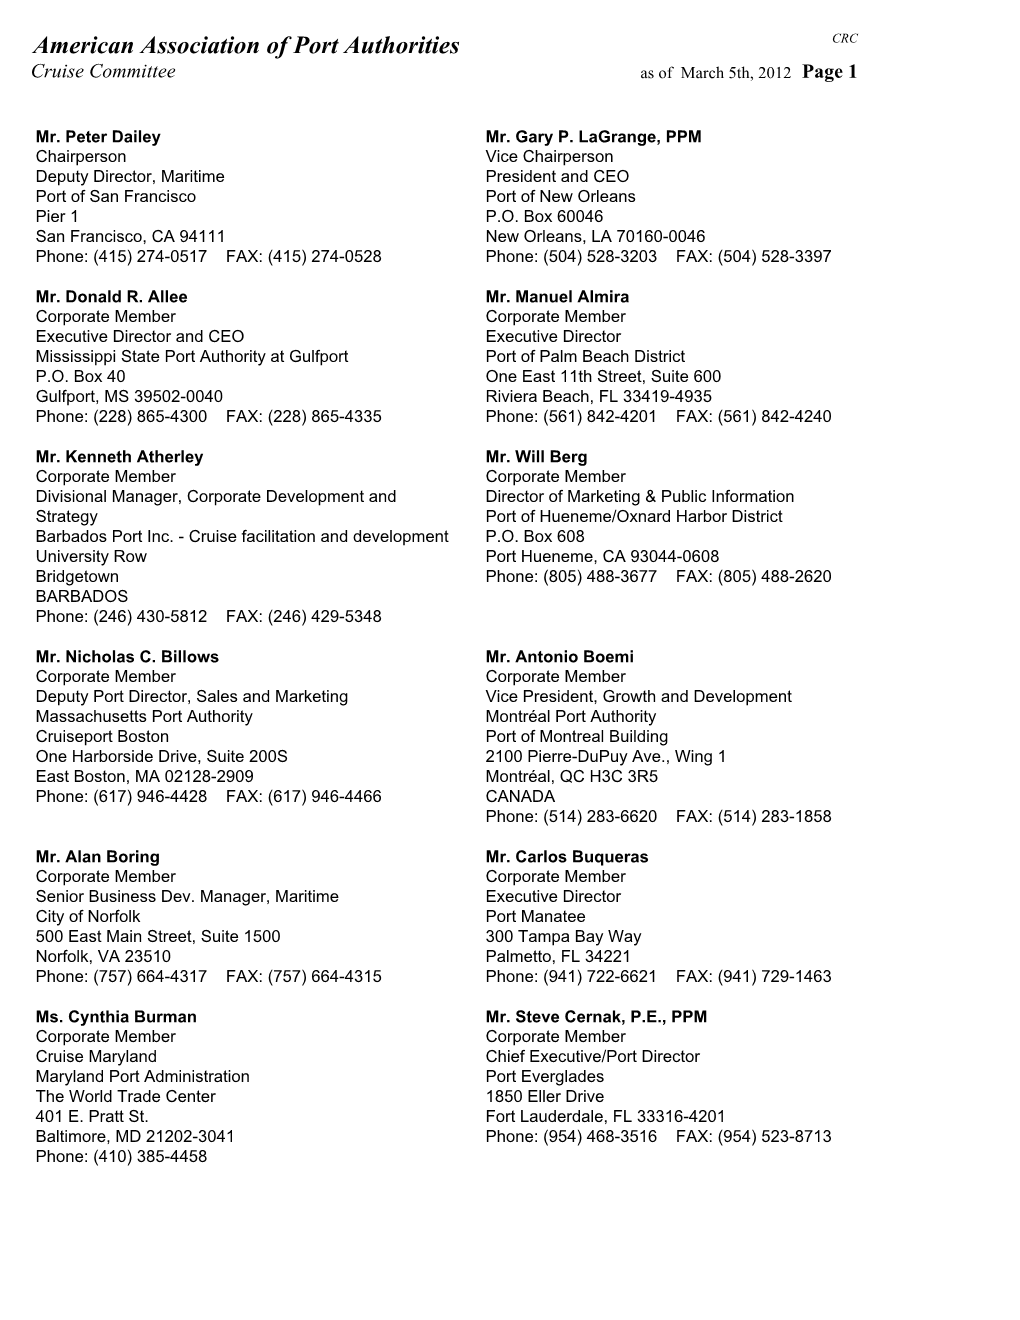 AAPA Cruise Committee Roster 5MAR2012